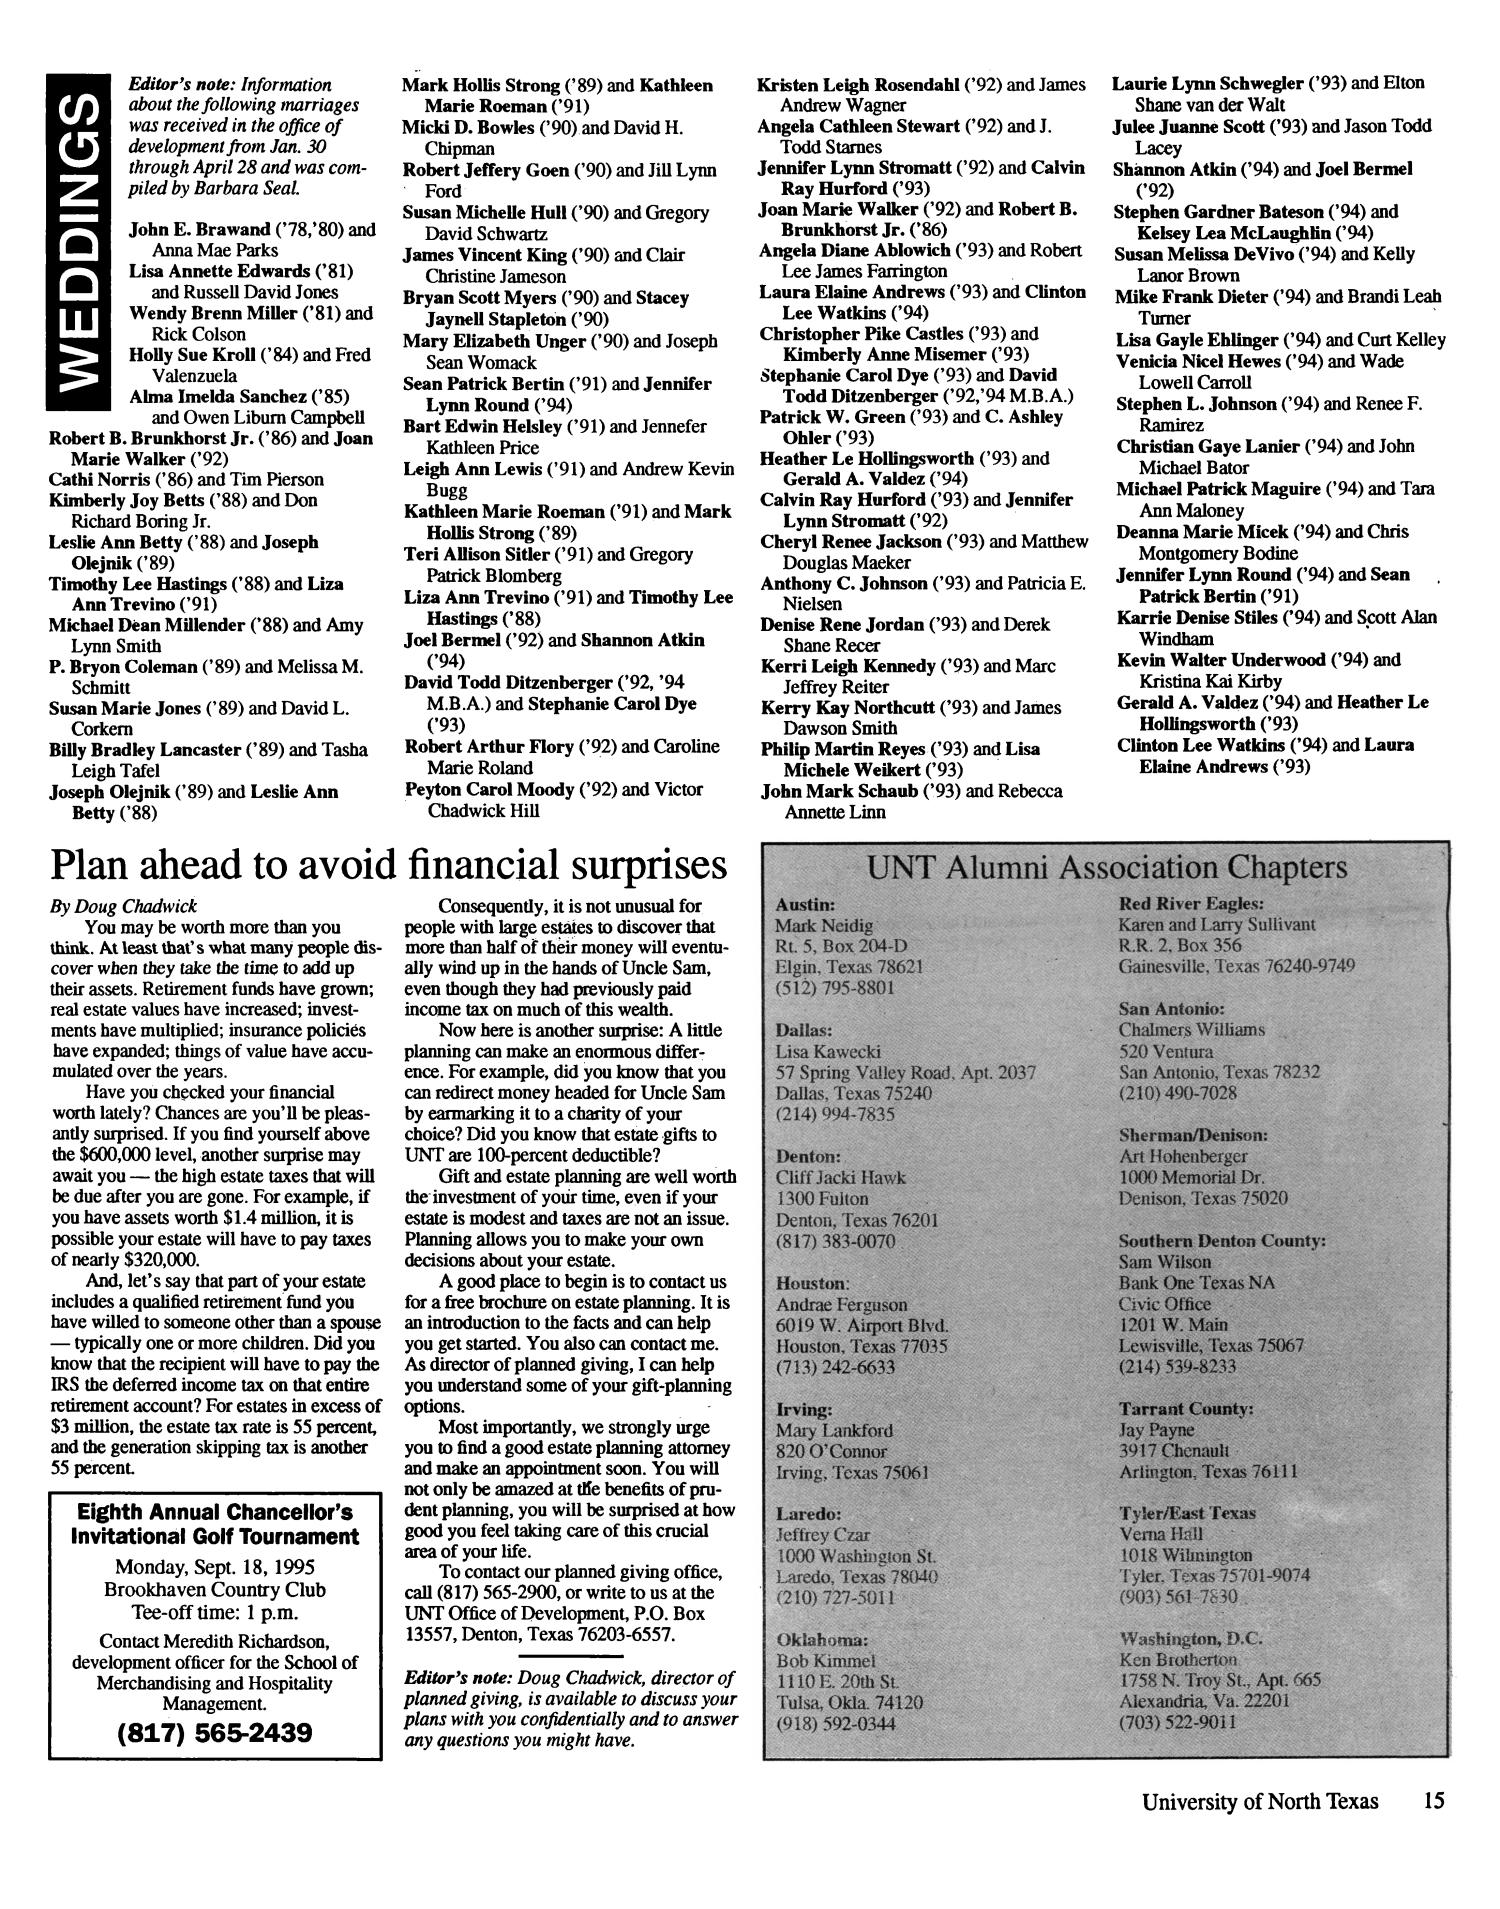 The North Texan, Volume 45, Number 2, Summer 1995
                                                
                                                    15
                                                